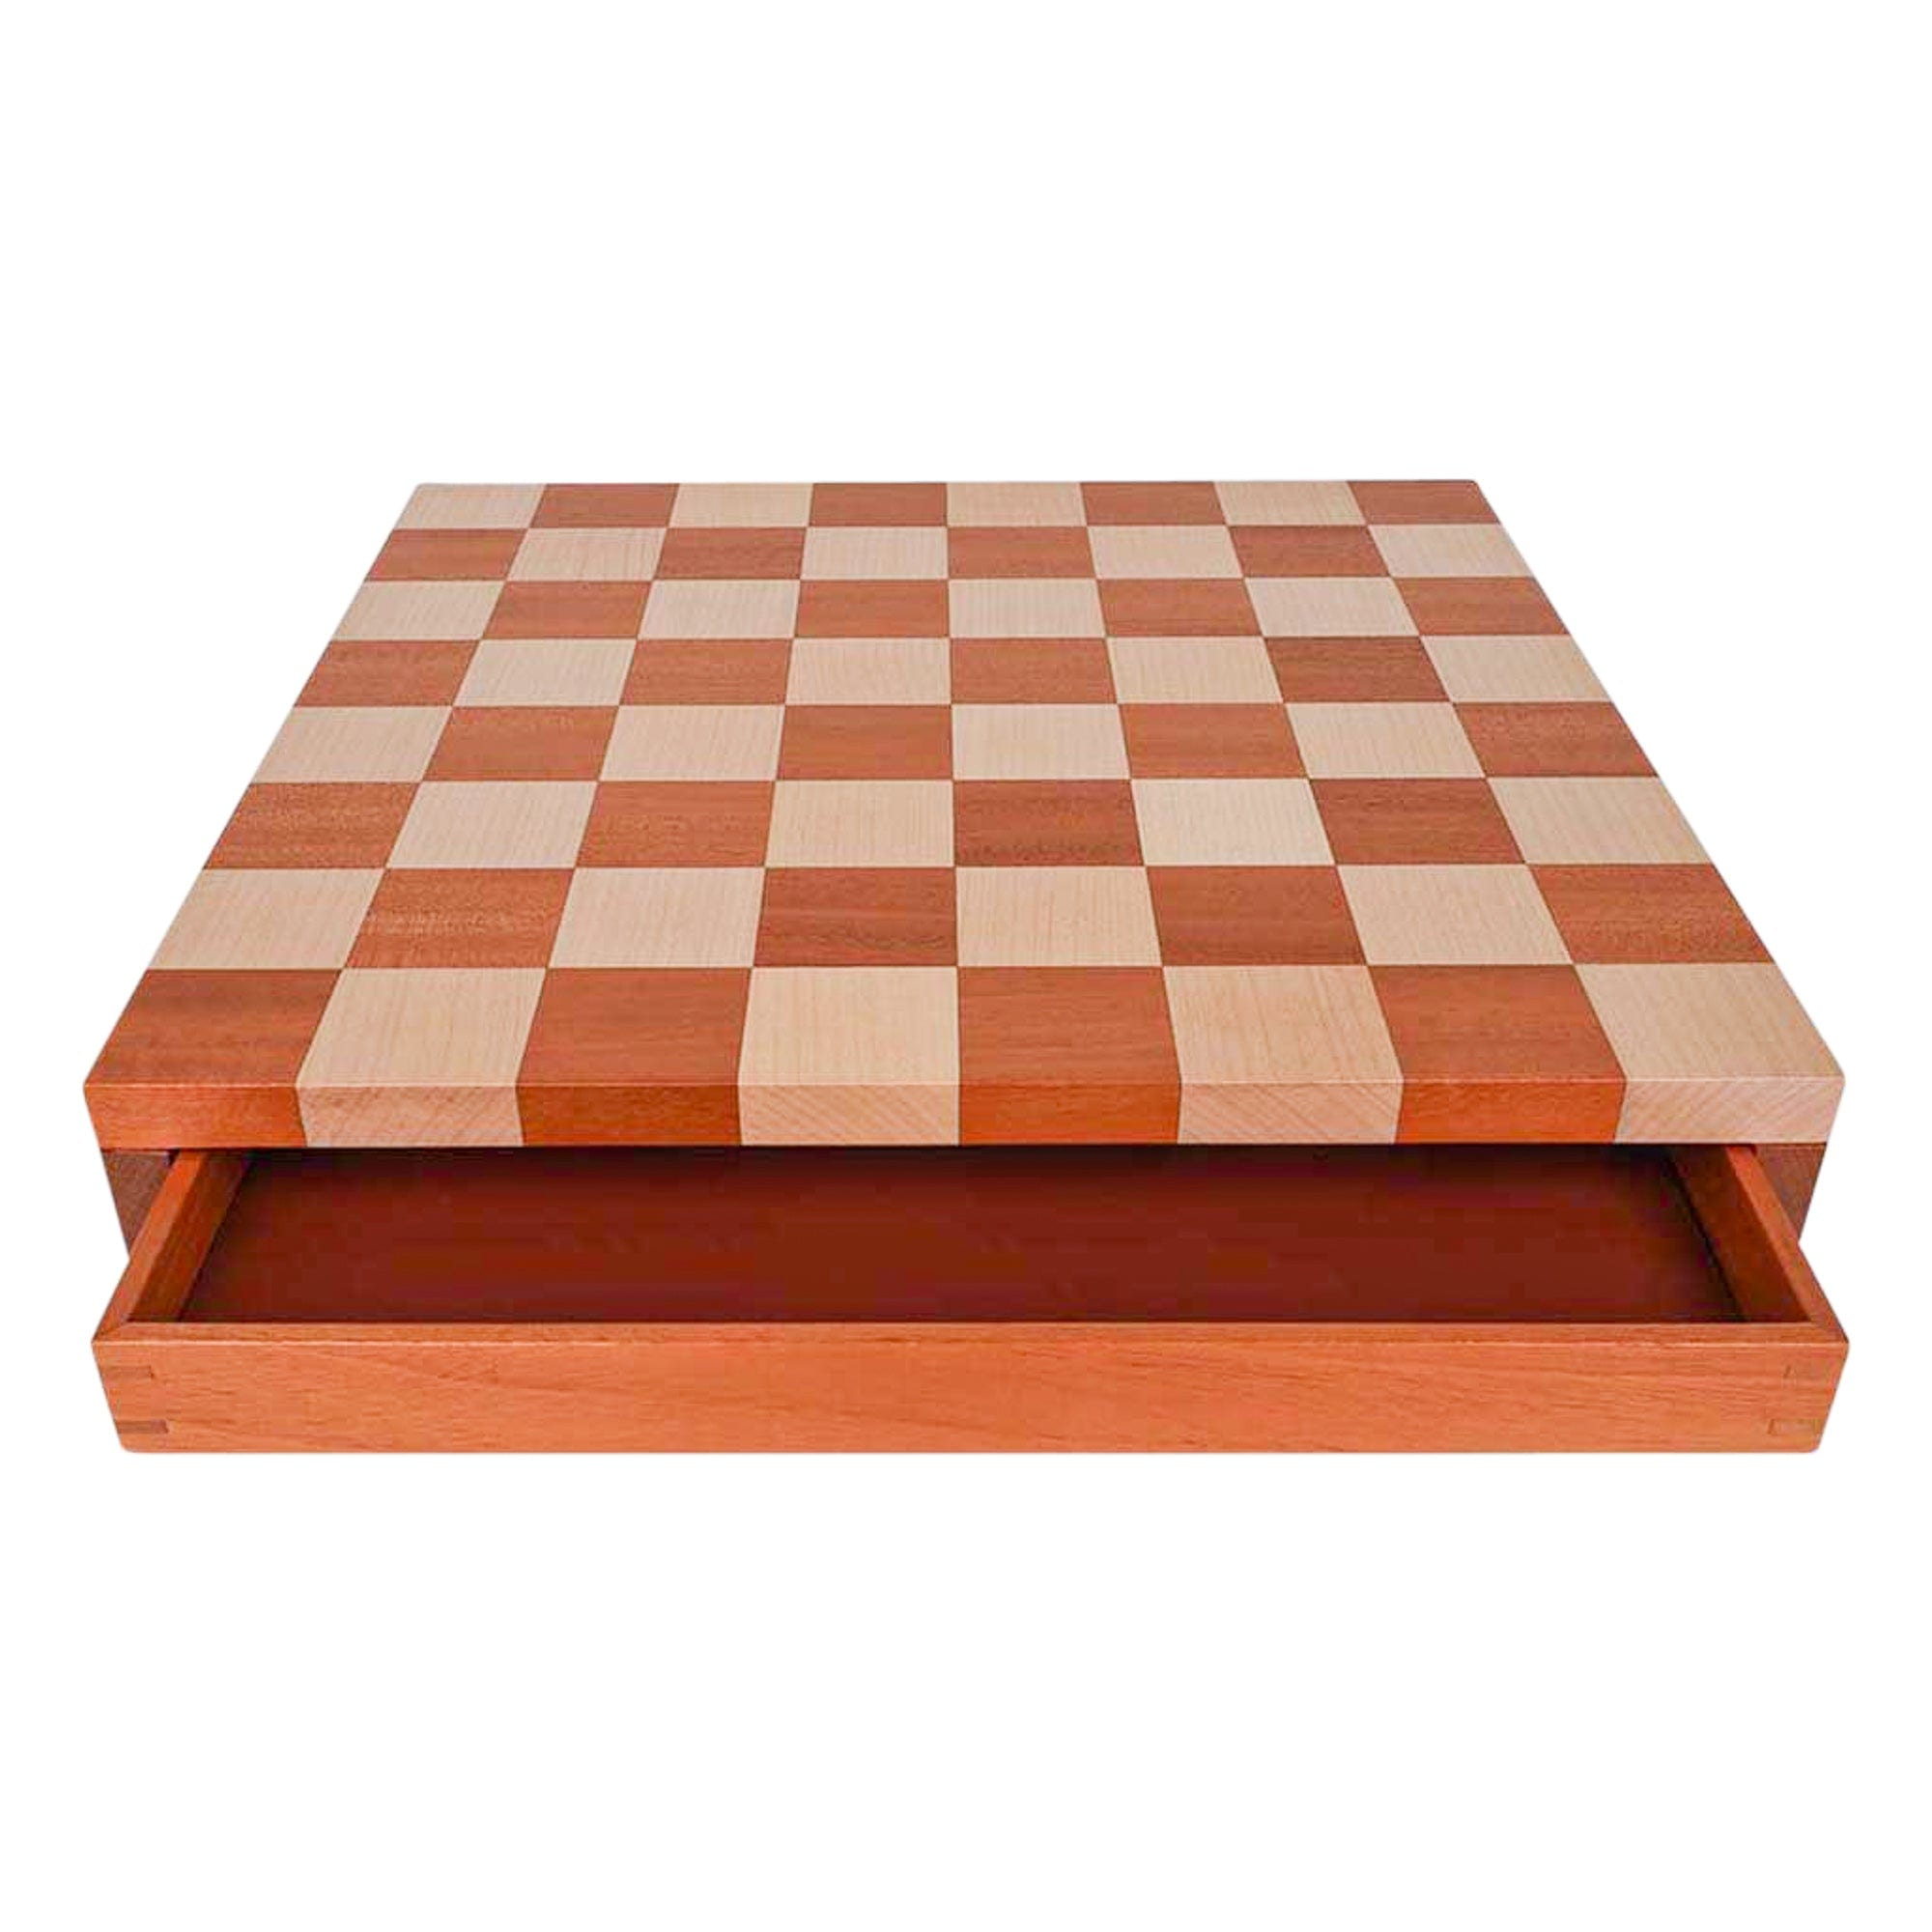 hermes Chess set in natural sycamore and mahogany wood with lambskin lined  drawers . . . . . . . . . . . . . . #luxeliving11 #luxury…